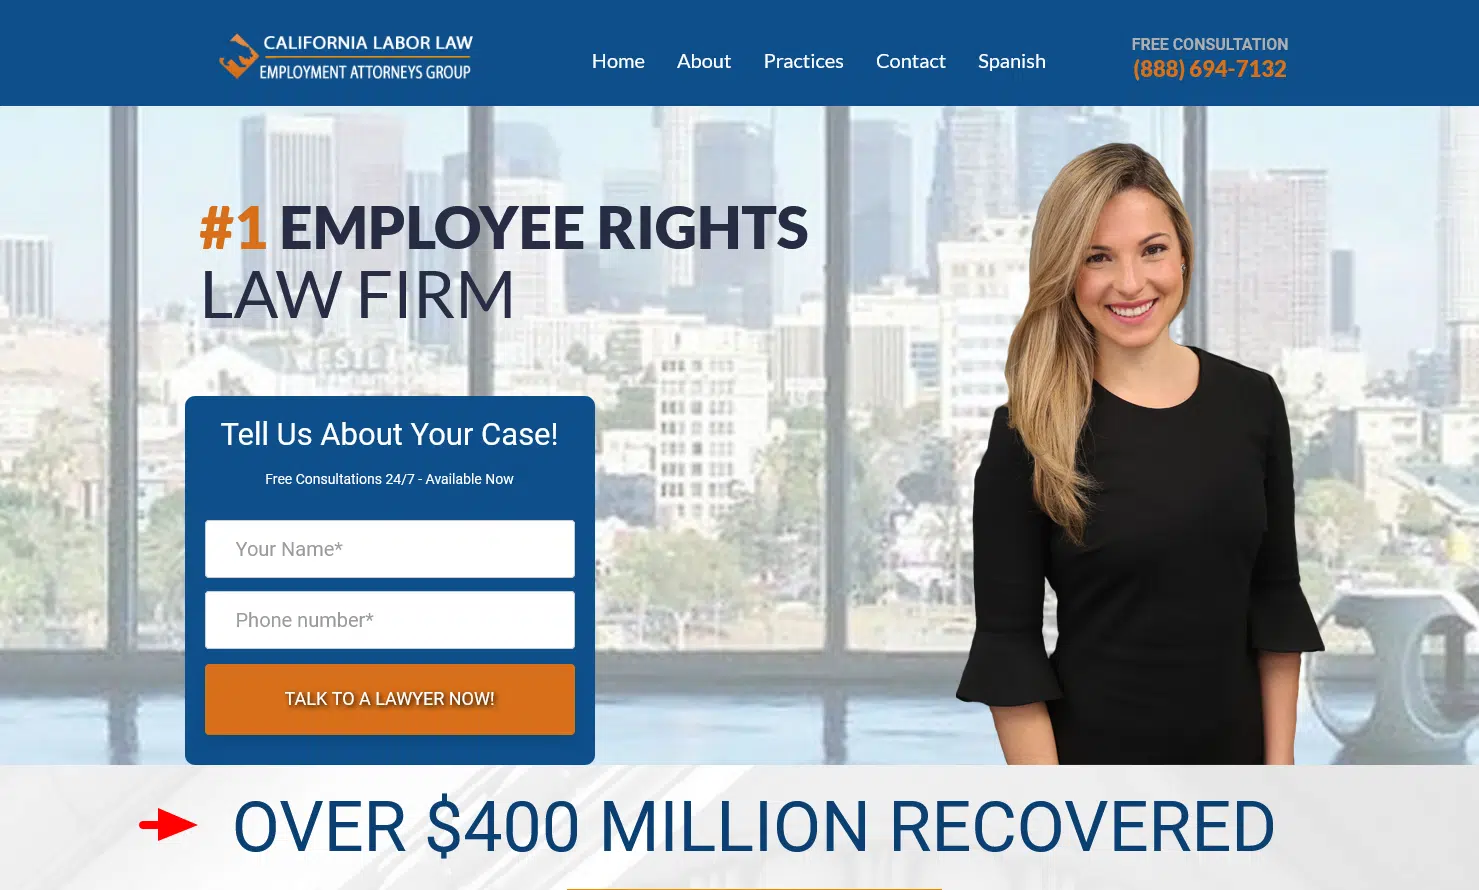 California_Labor_Law_Employment_Attorneys_Group_Wrongful_Termination_Lawyers